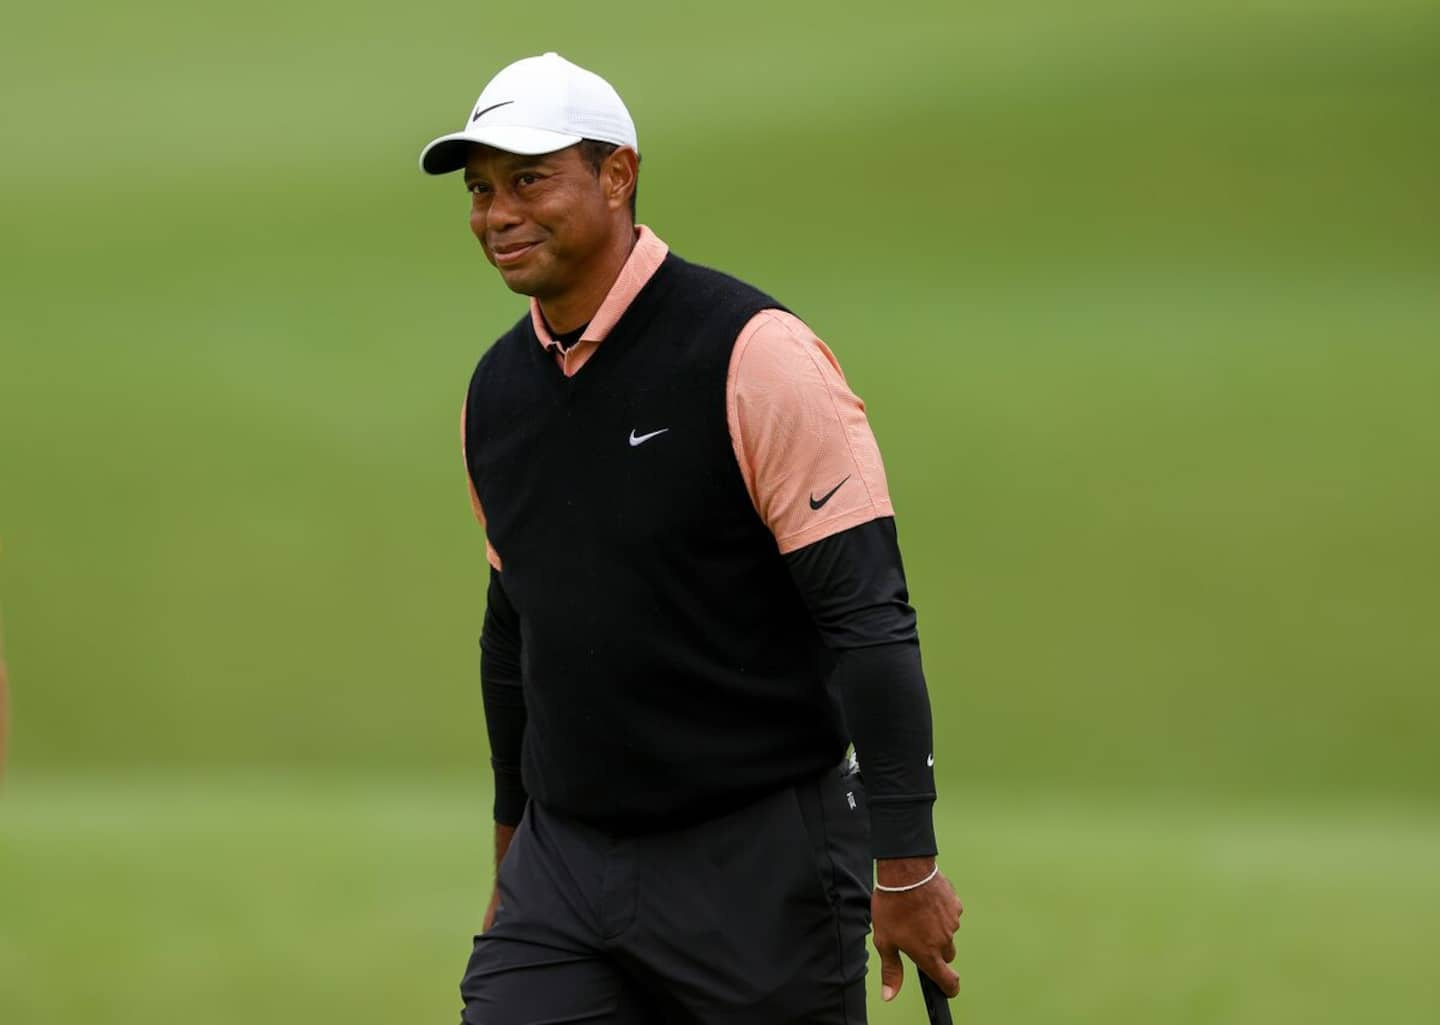 Tiger Woods, third member of the Billionaire Athletes Club